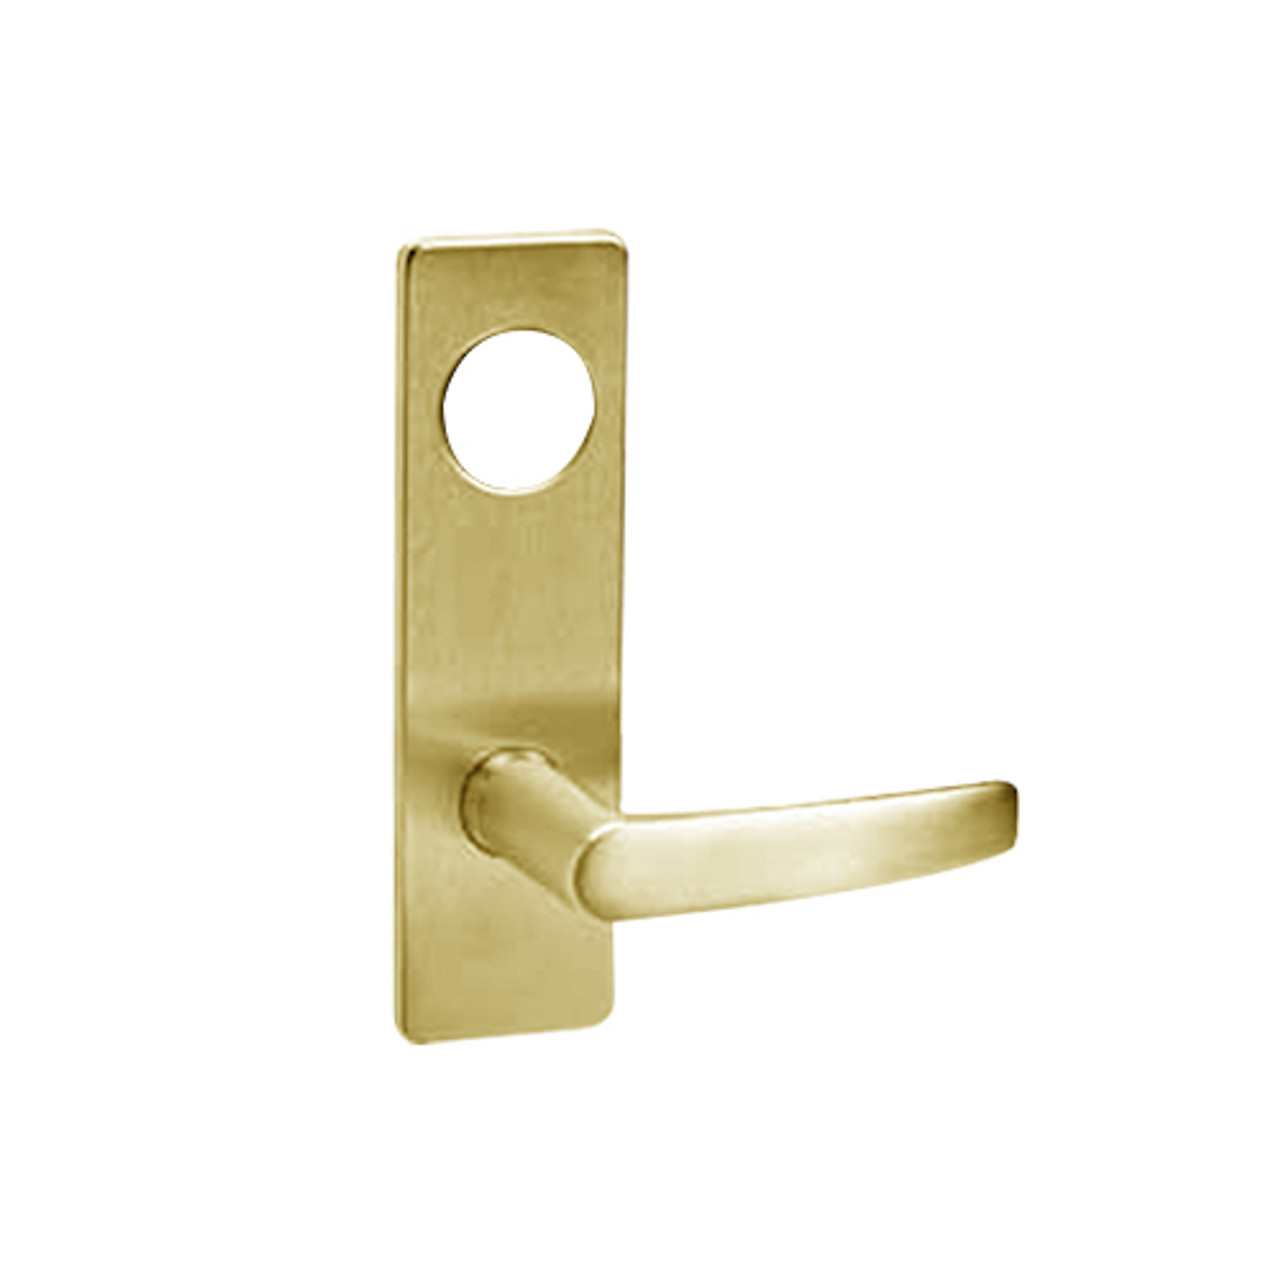 ML2057-ASR-605-M31 Corbin Russwin ML2000 Series Mortise Storeroom Trim Pack with Armstrong Lever in Bright Brass